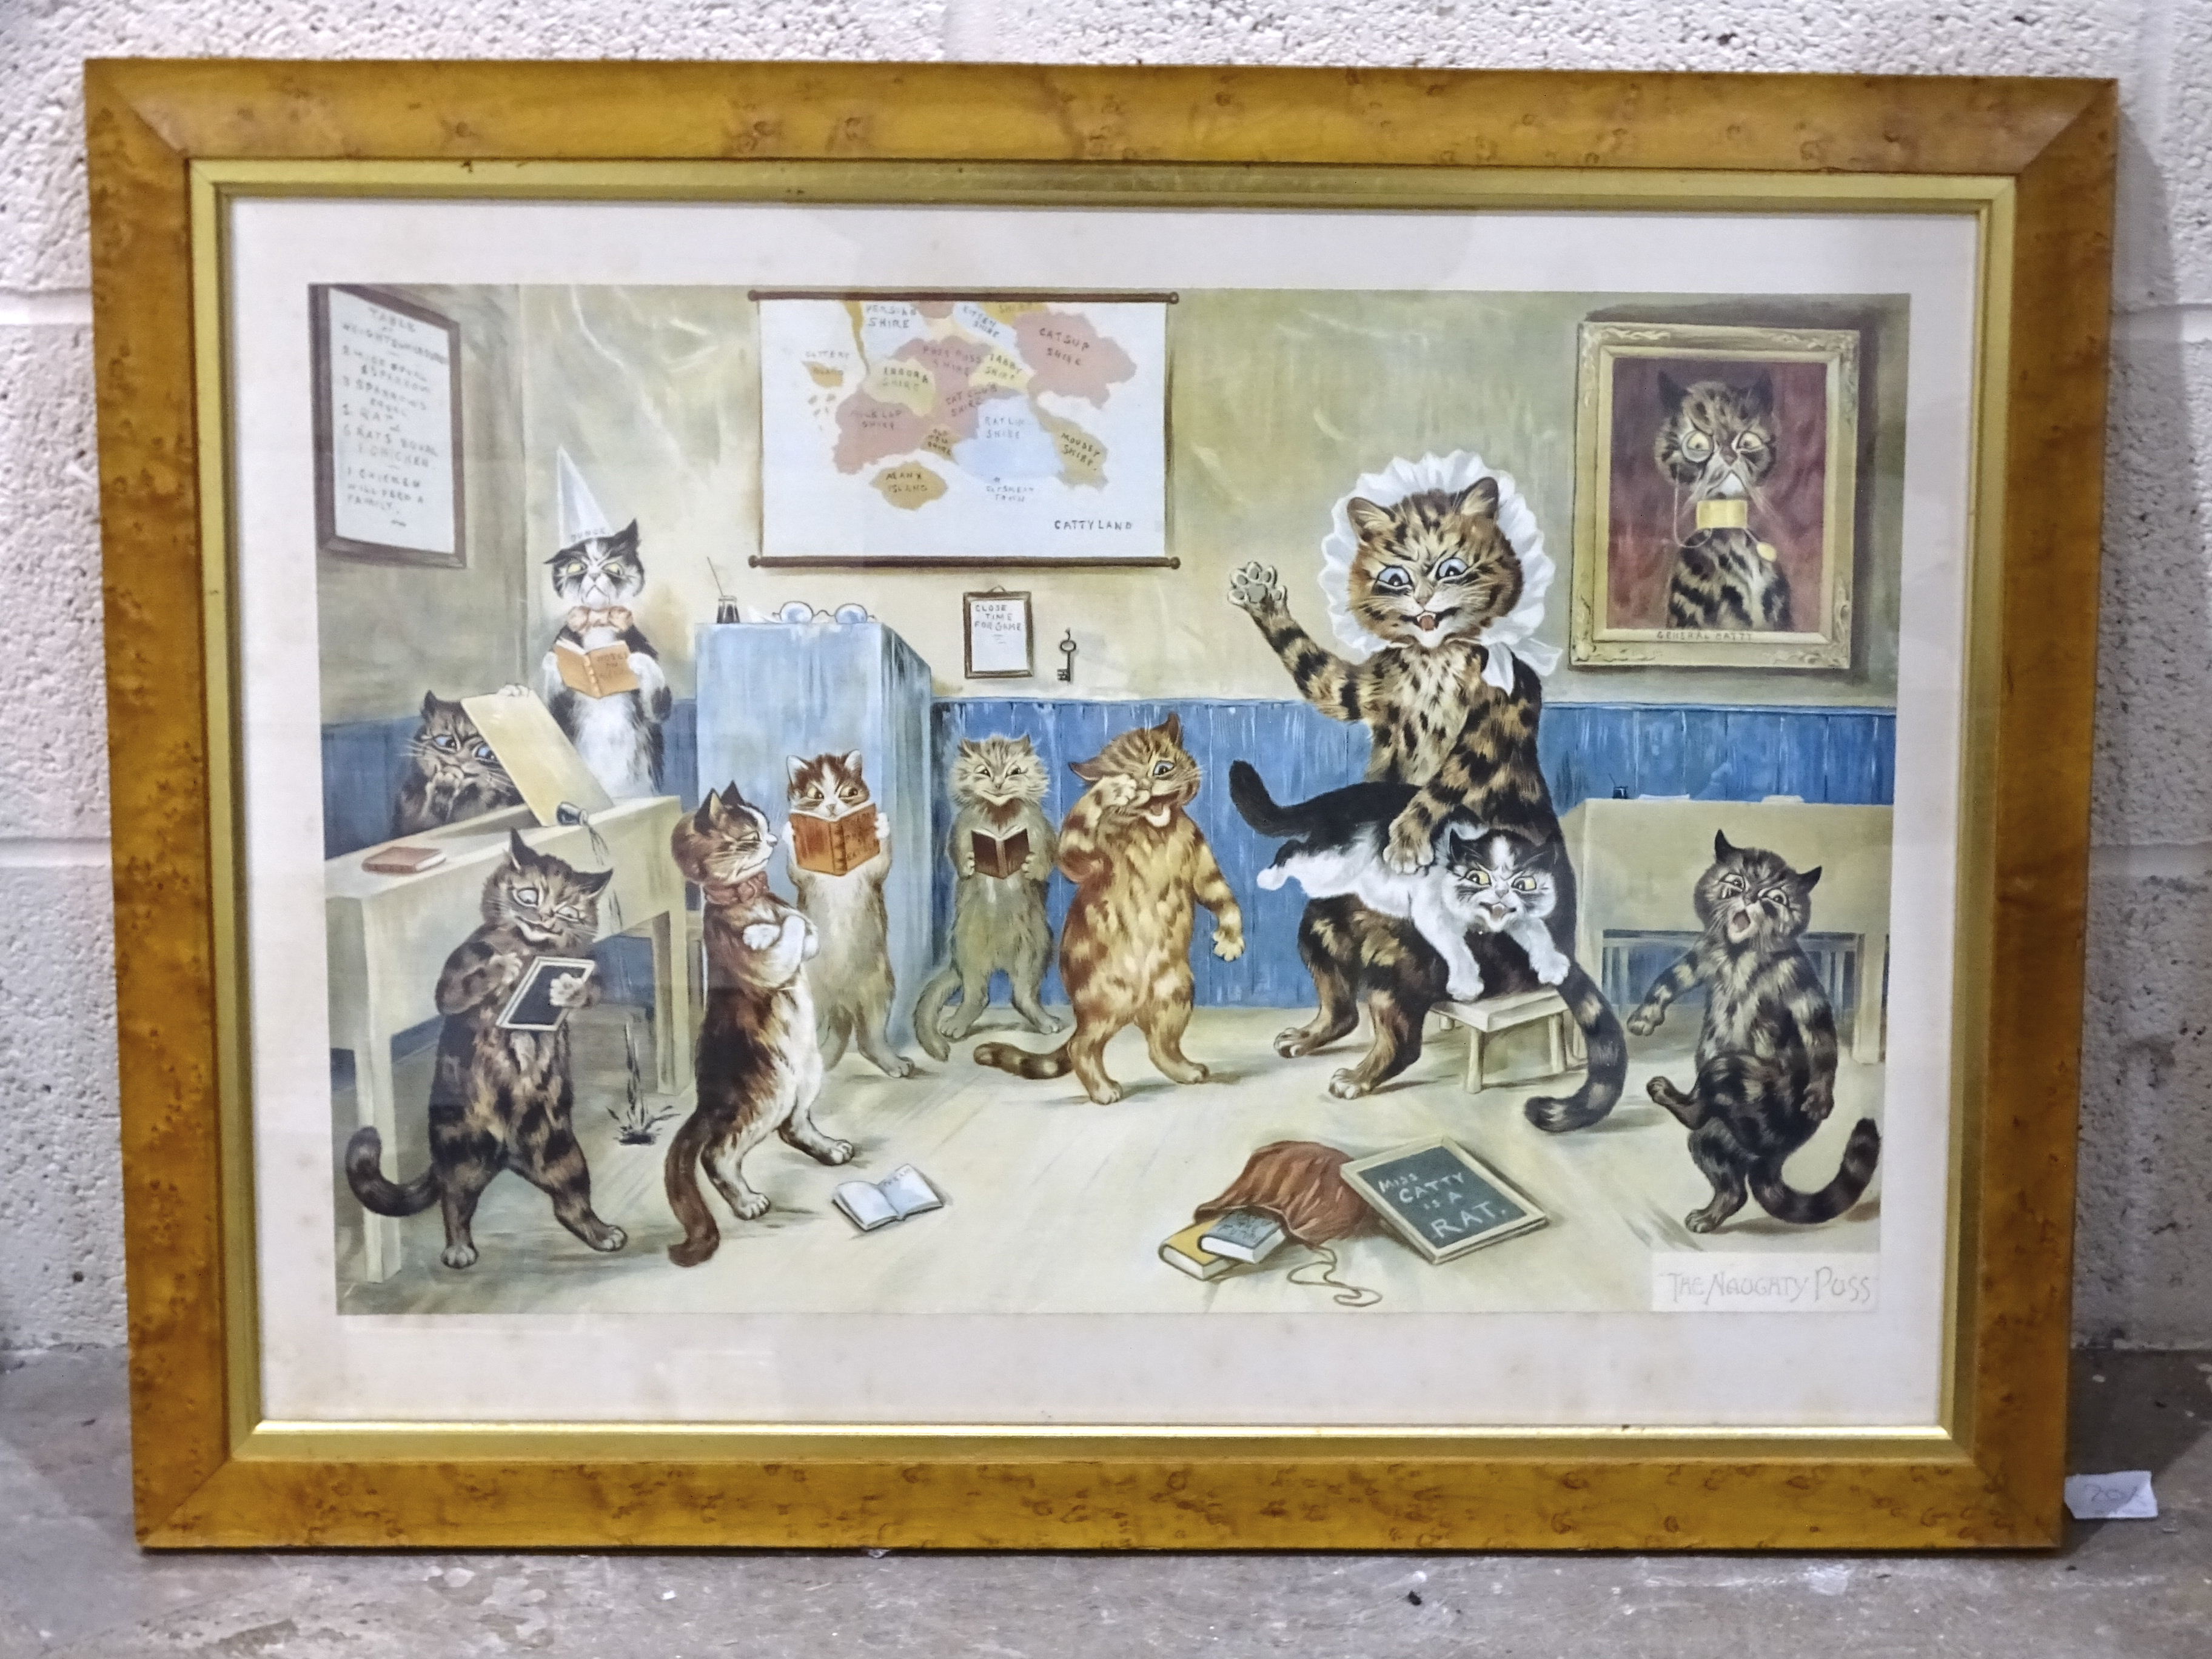 A coloured lithographic print after Louis Wain, "The Naughty Puss", in maple frame, image 40 x 61cm, - Image 3 of 3